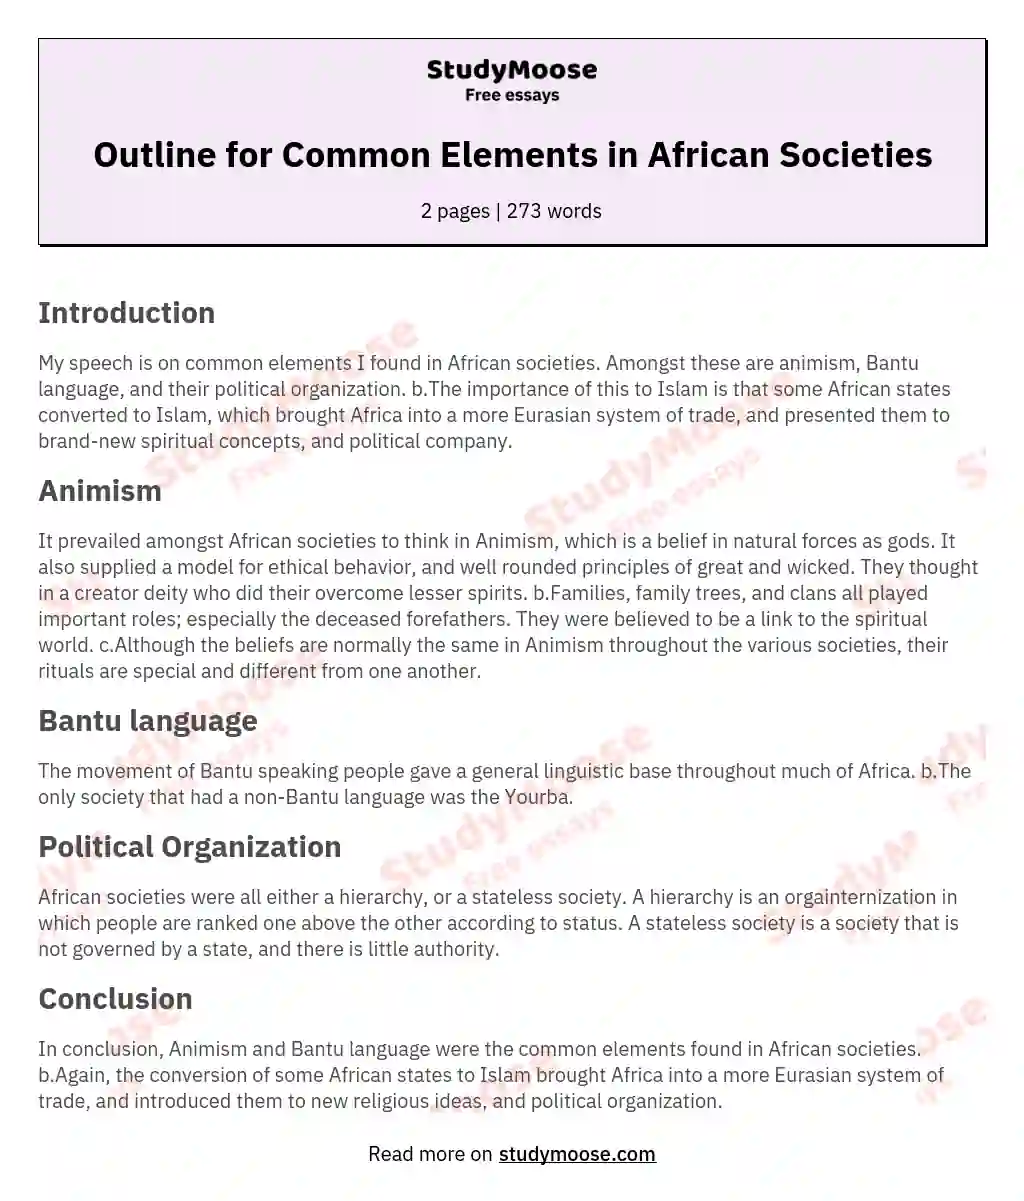 Outline for Common Elements in African Societies essay